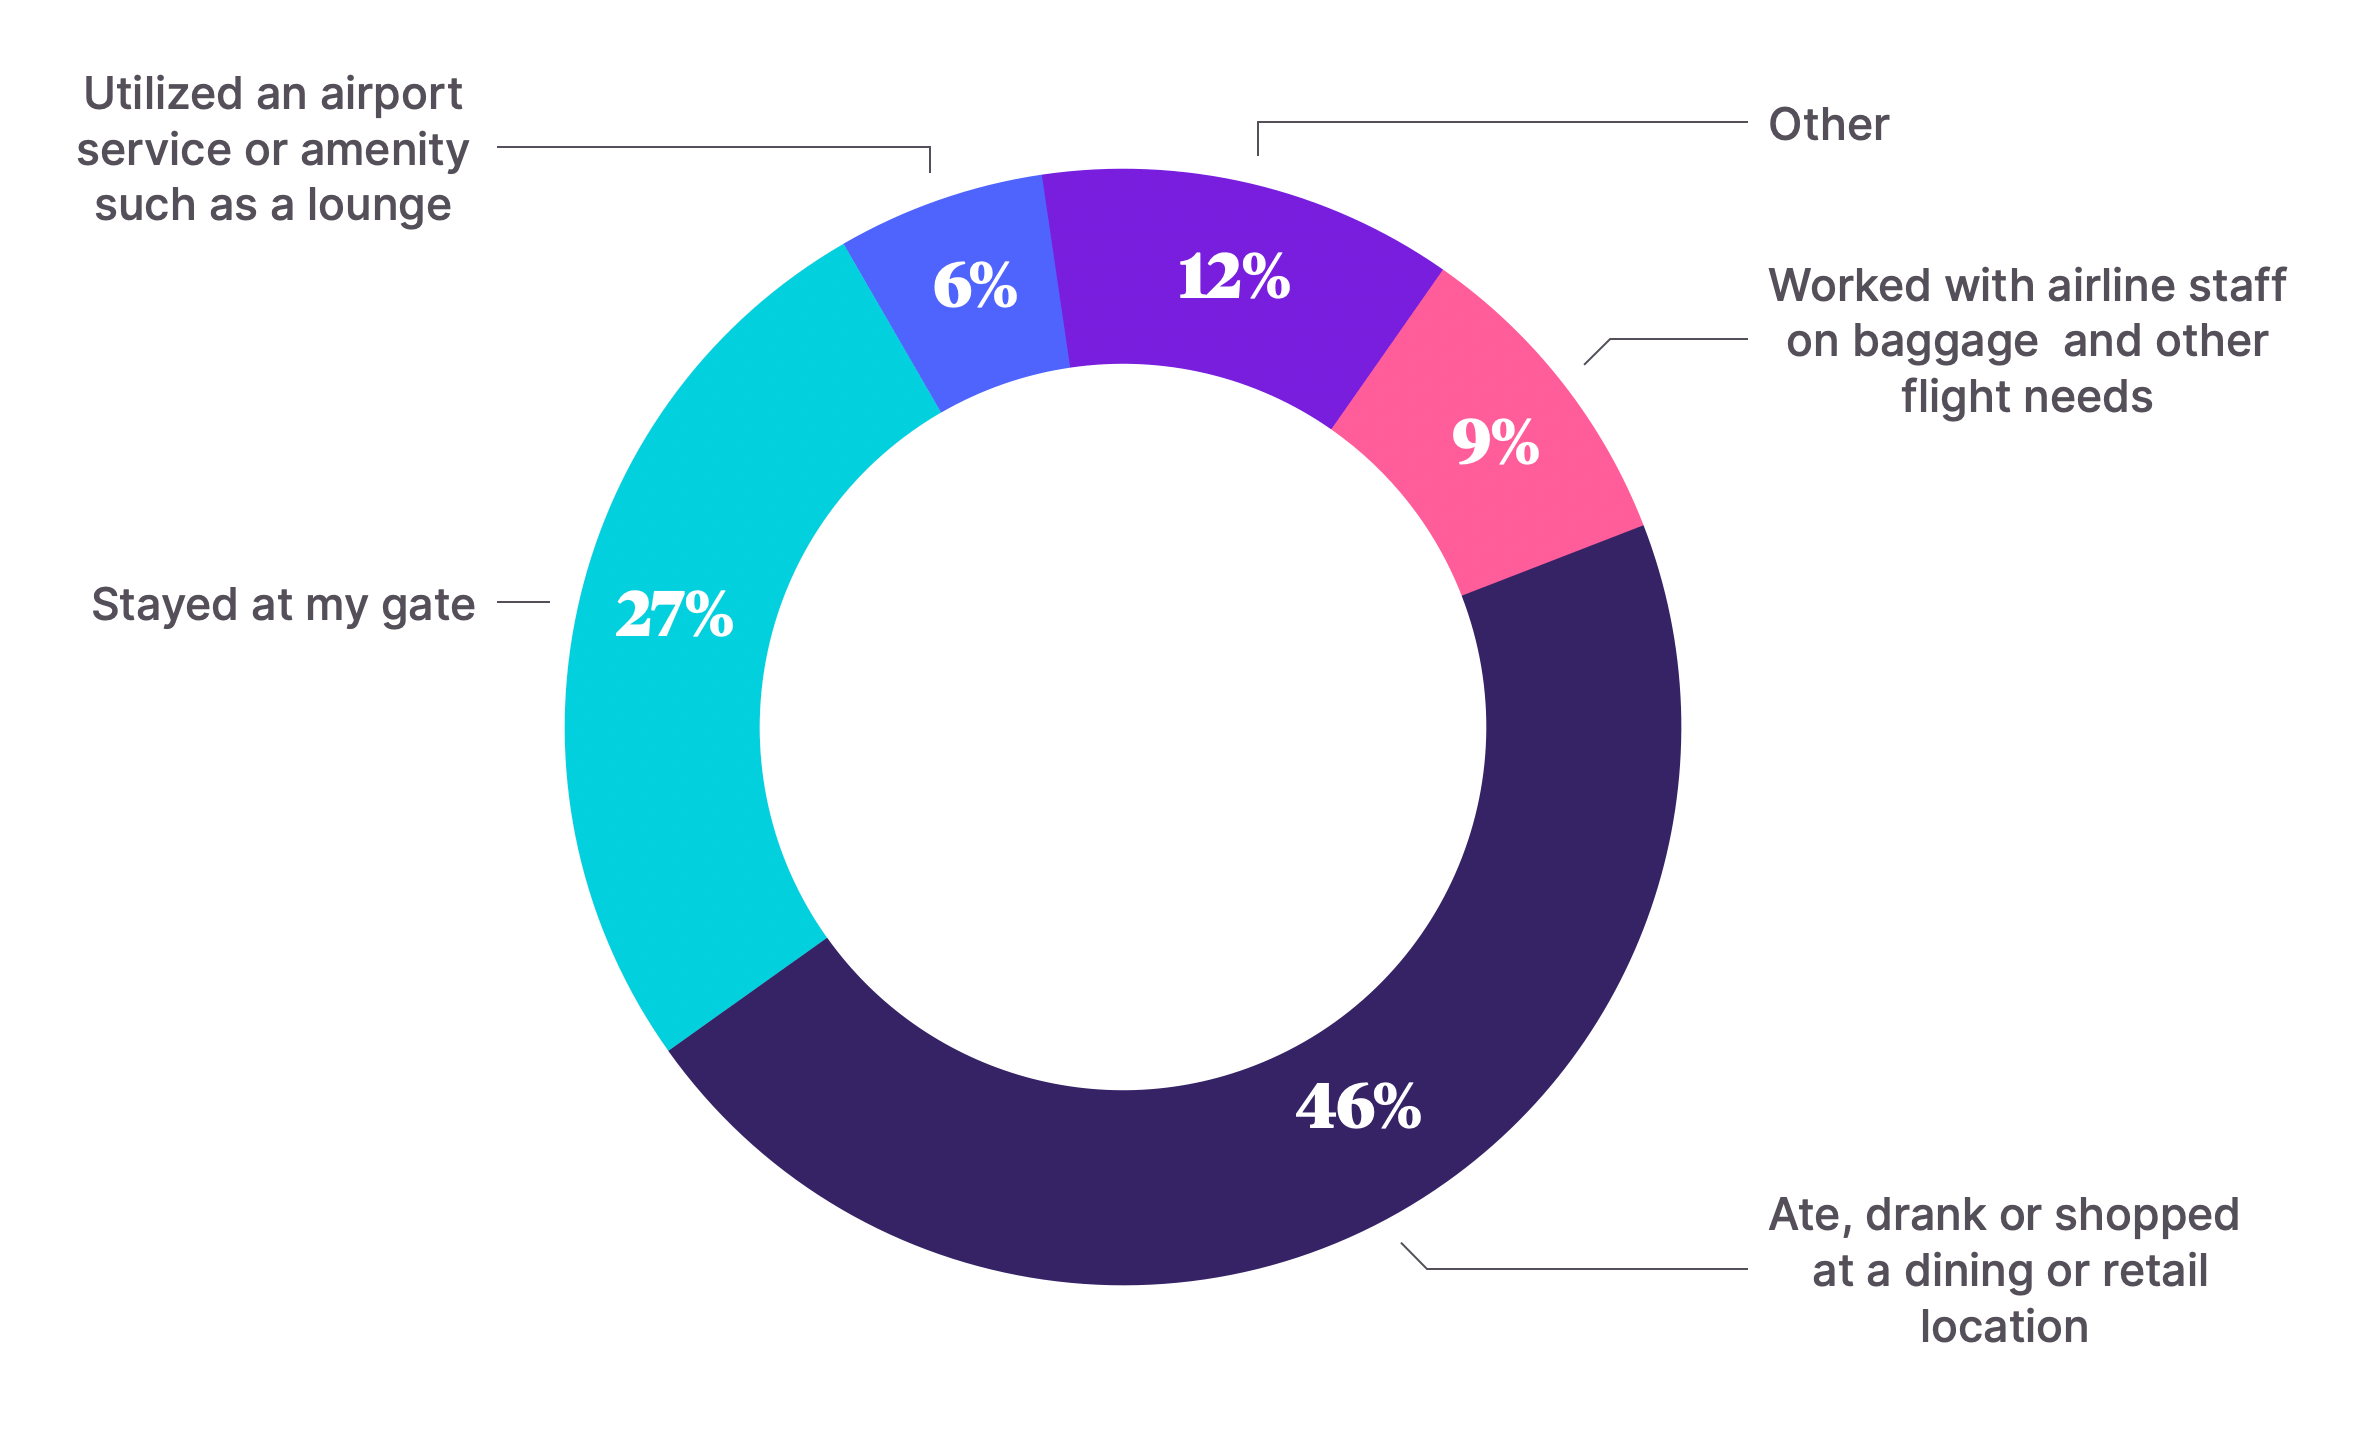 Pie chart showing virtual queueing survey results from the question "What did you do with your free time?" 